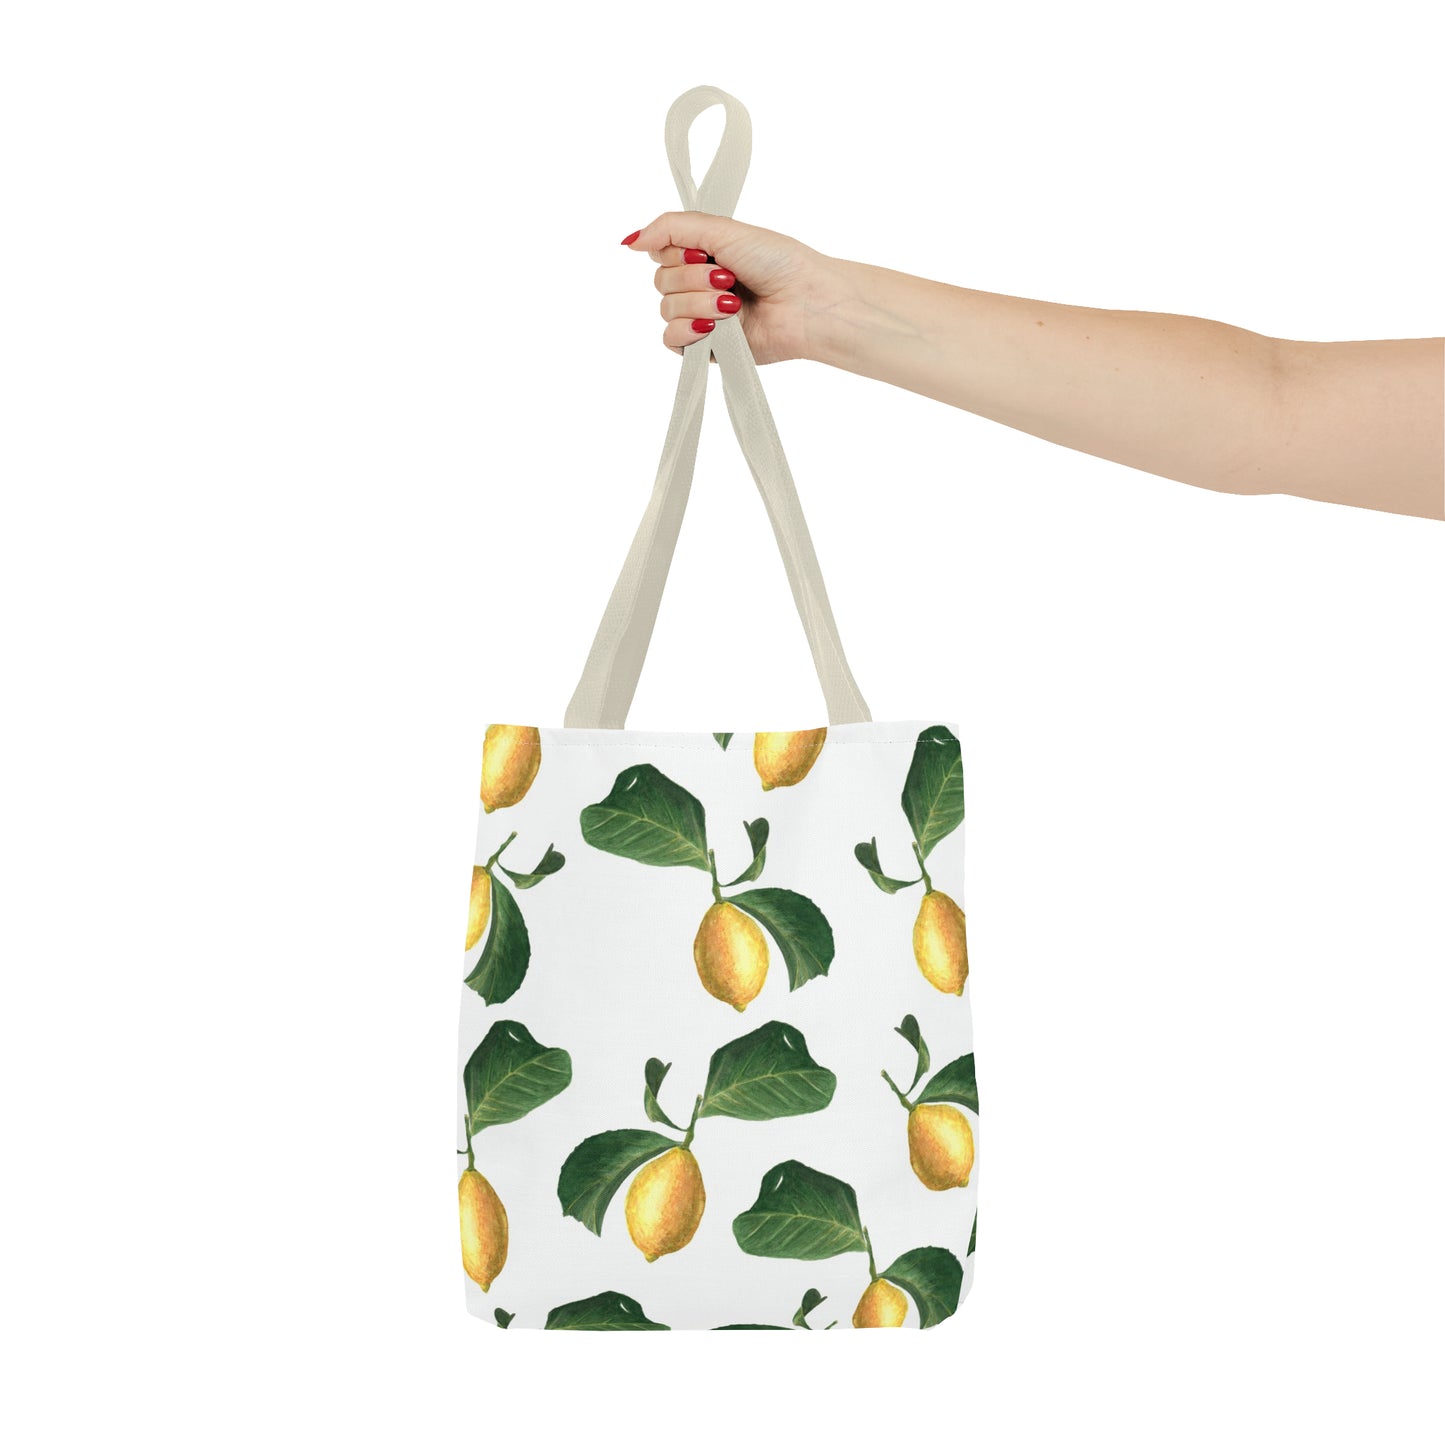 Tote Bag - Watercolor Lime paint by Ana Cecilia Mannaert